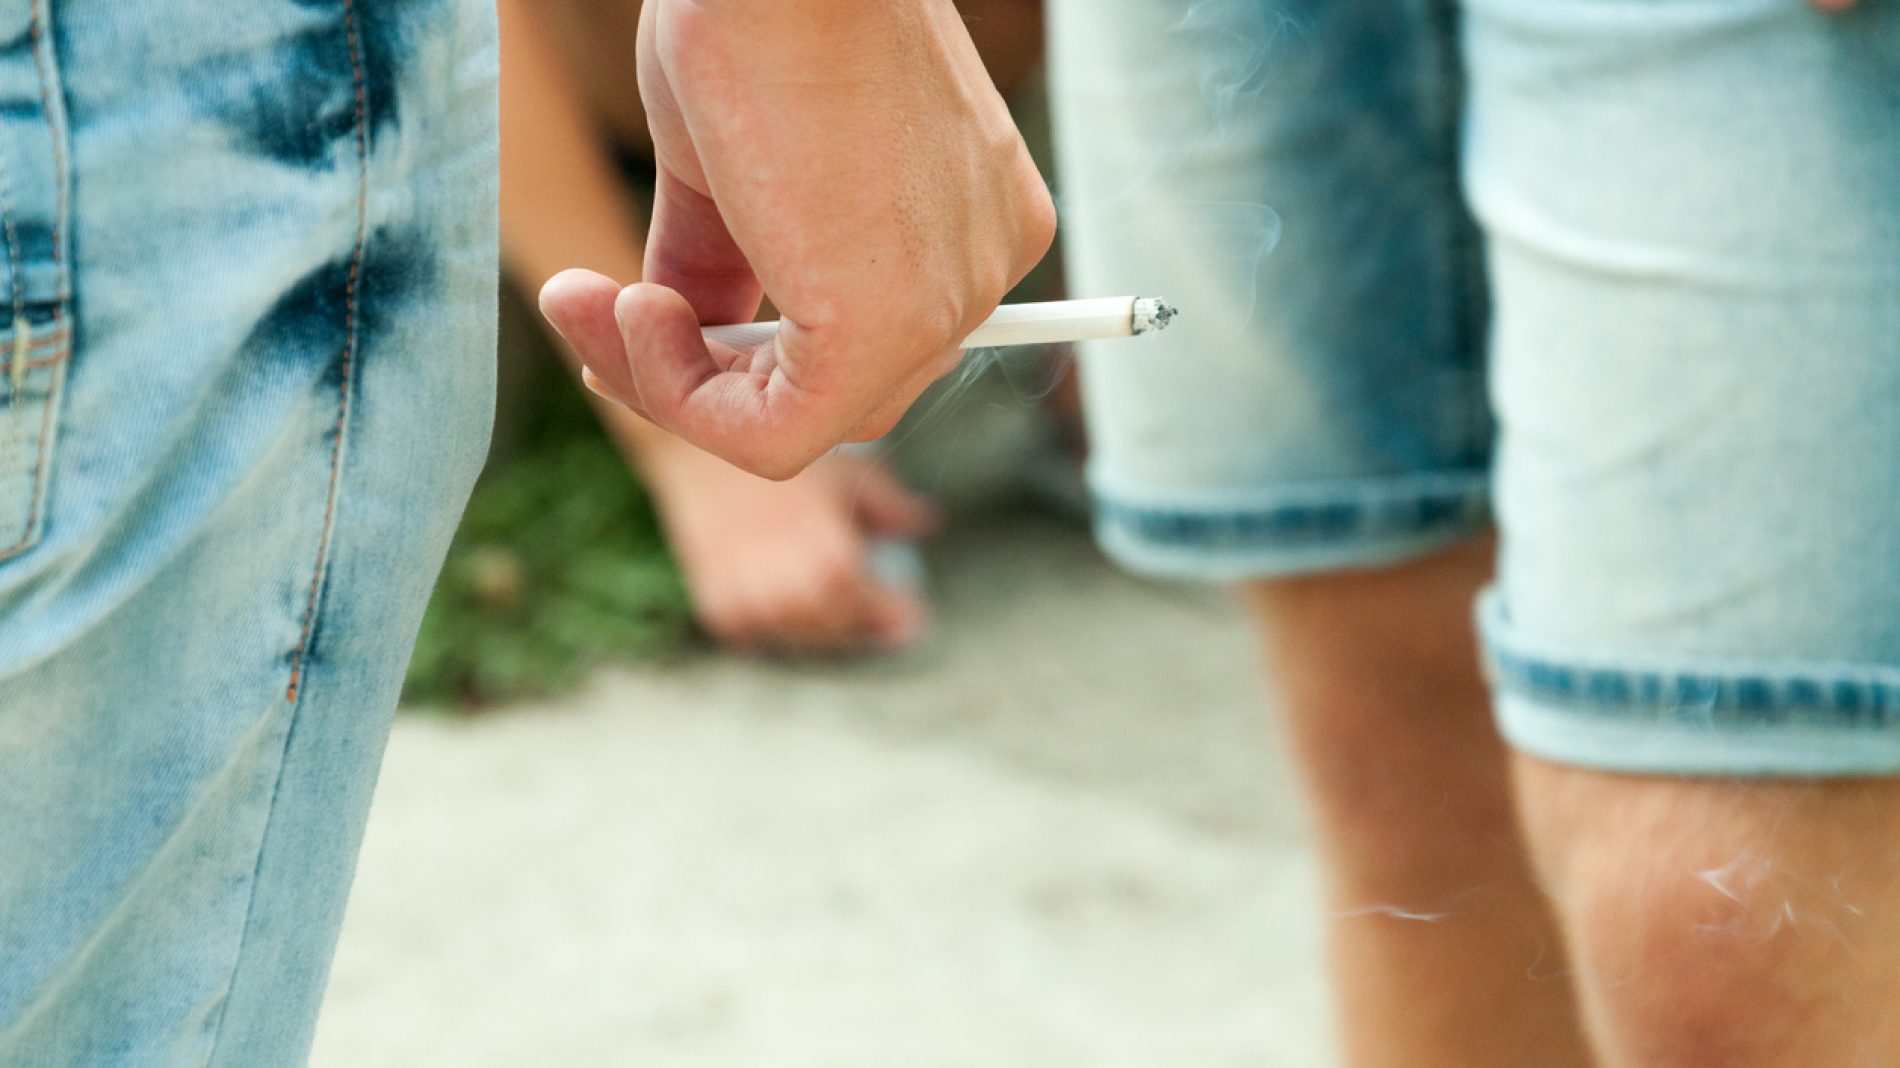 Hand of young man holding cigarette and standing in group of people on the street.